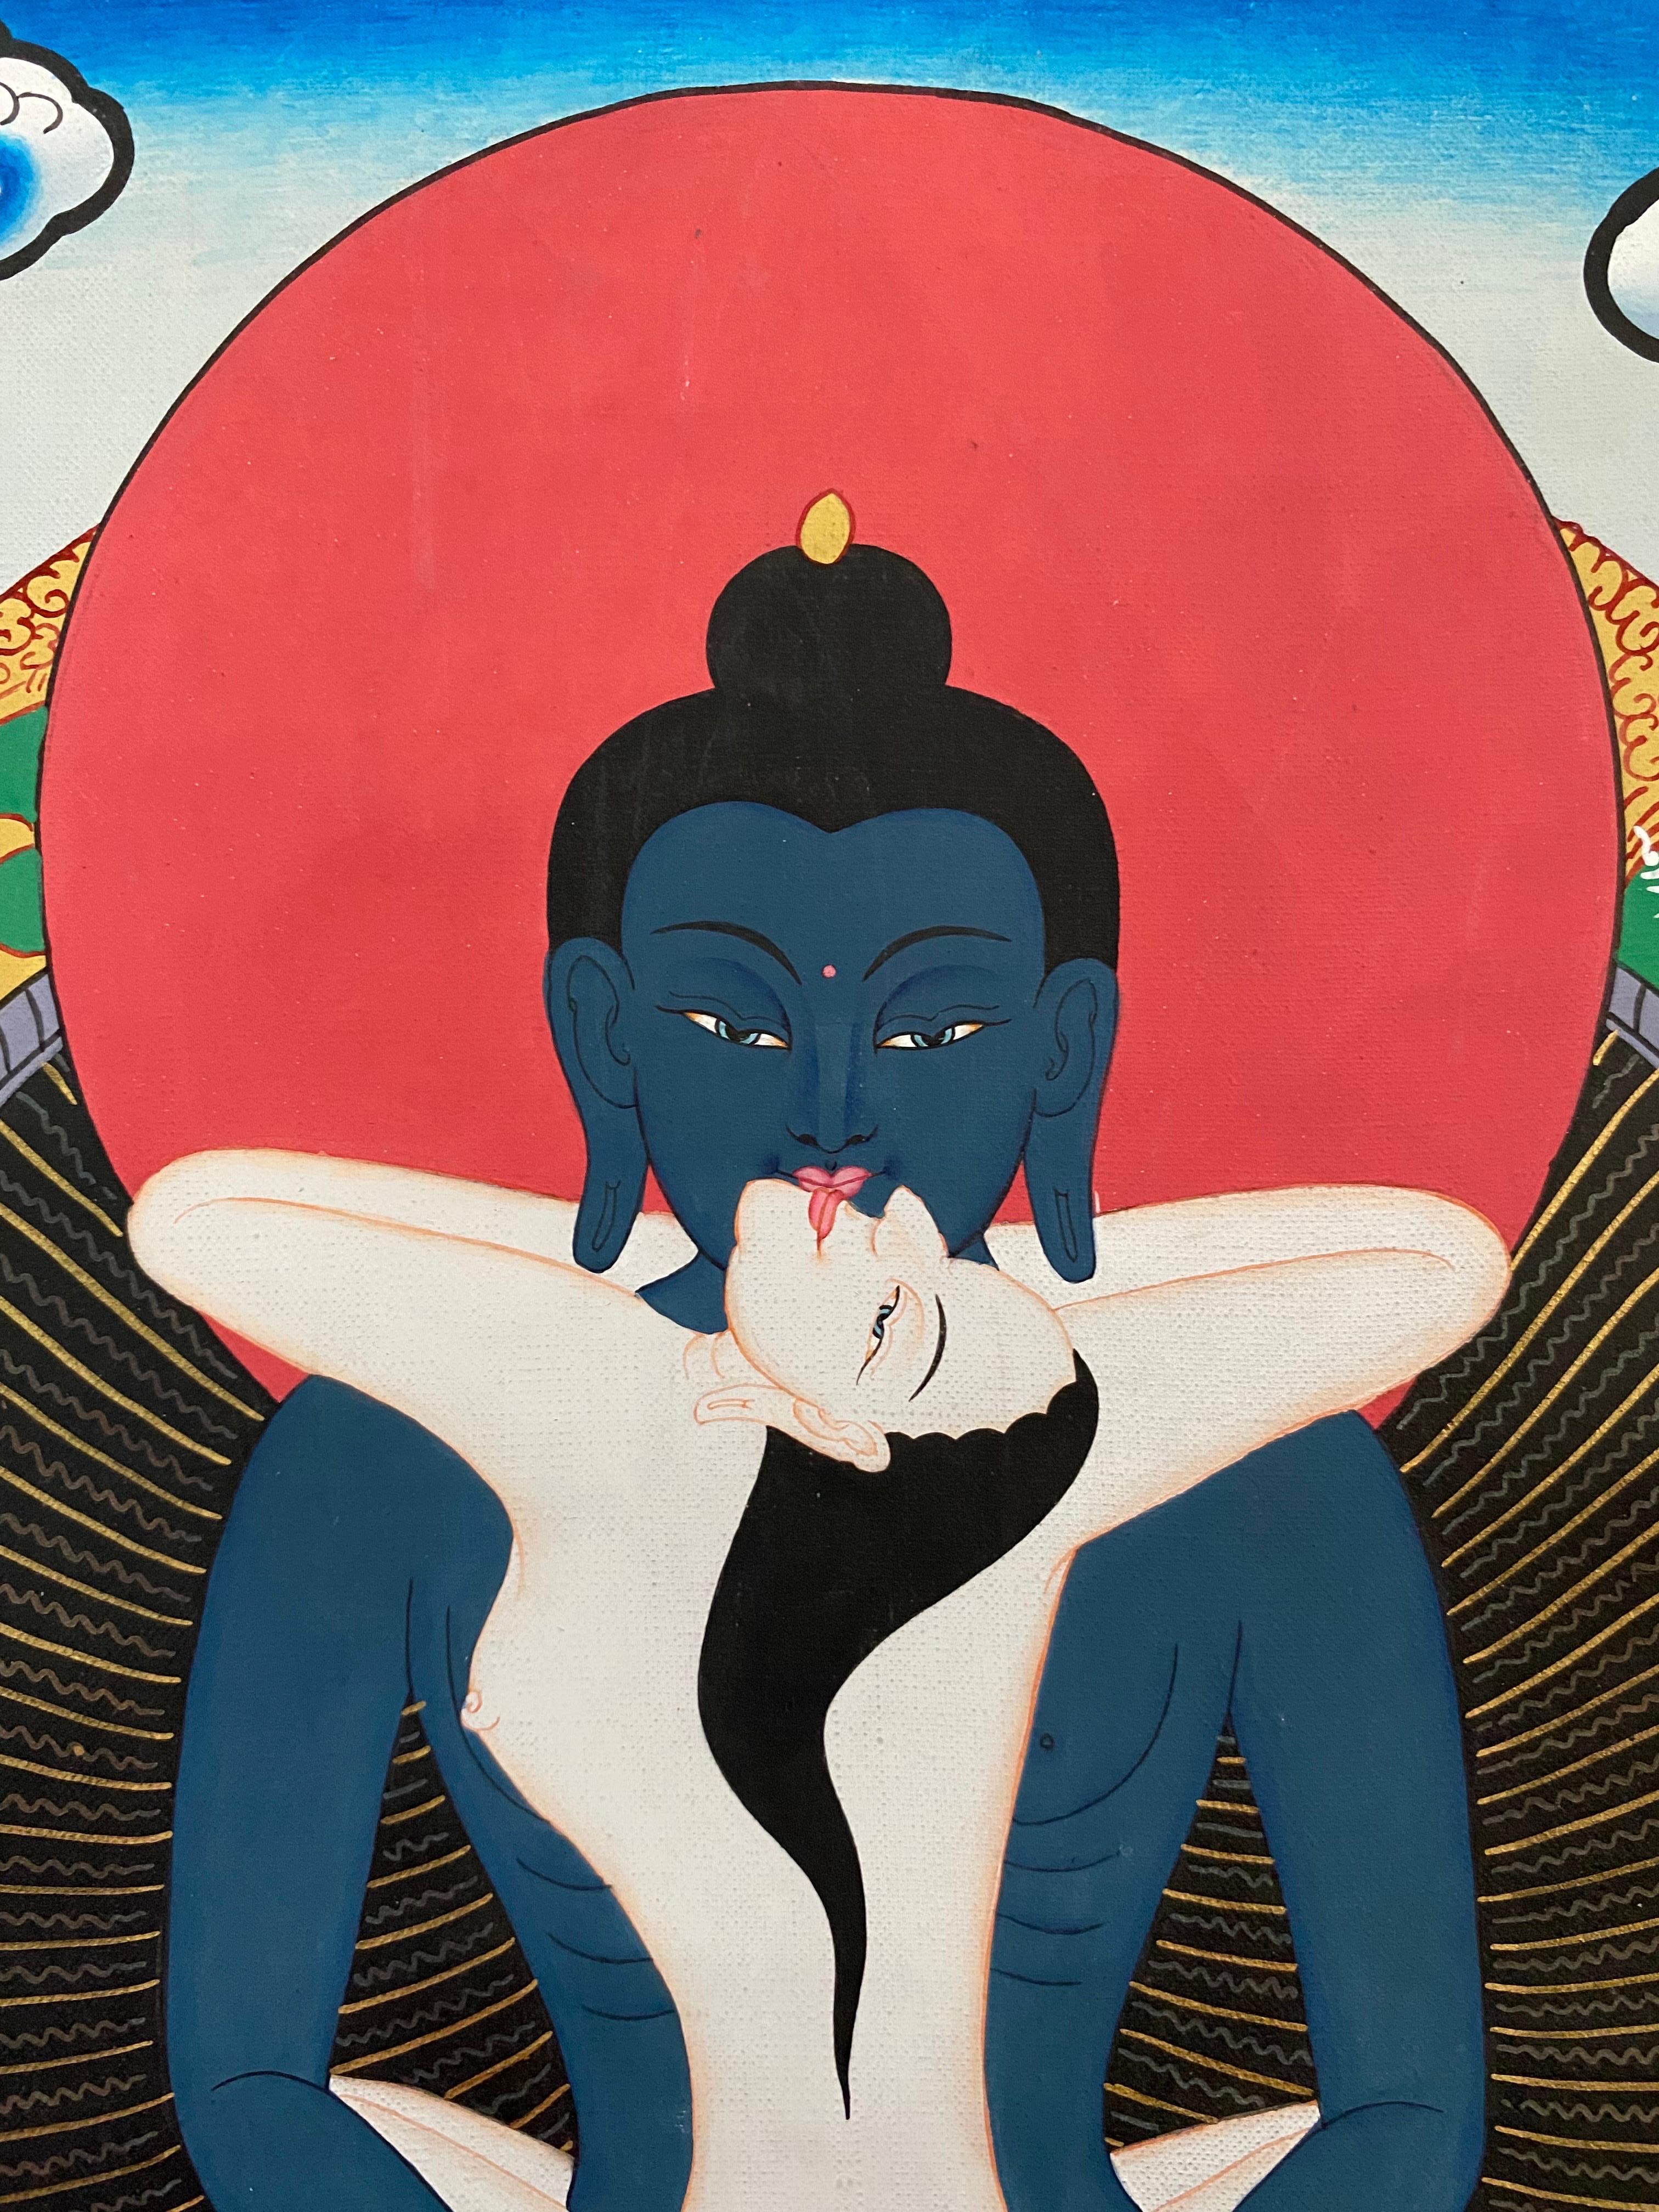 Buddha Samantabhadra (Shakti)  is deep blue in color, symbolizing the sky or emptiness of mind. Samantabhadra or buddha's consort is white in color, symbolizing the aspect of the clarity of our mind. The male female of Adi Buddha in union depict the